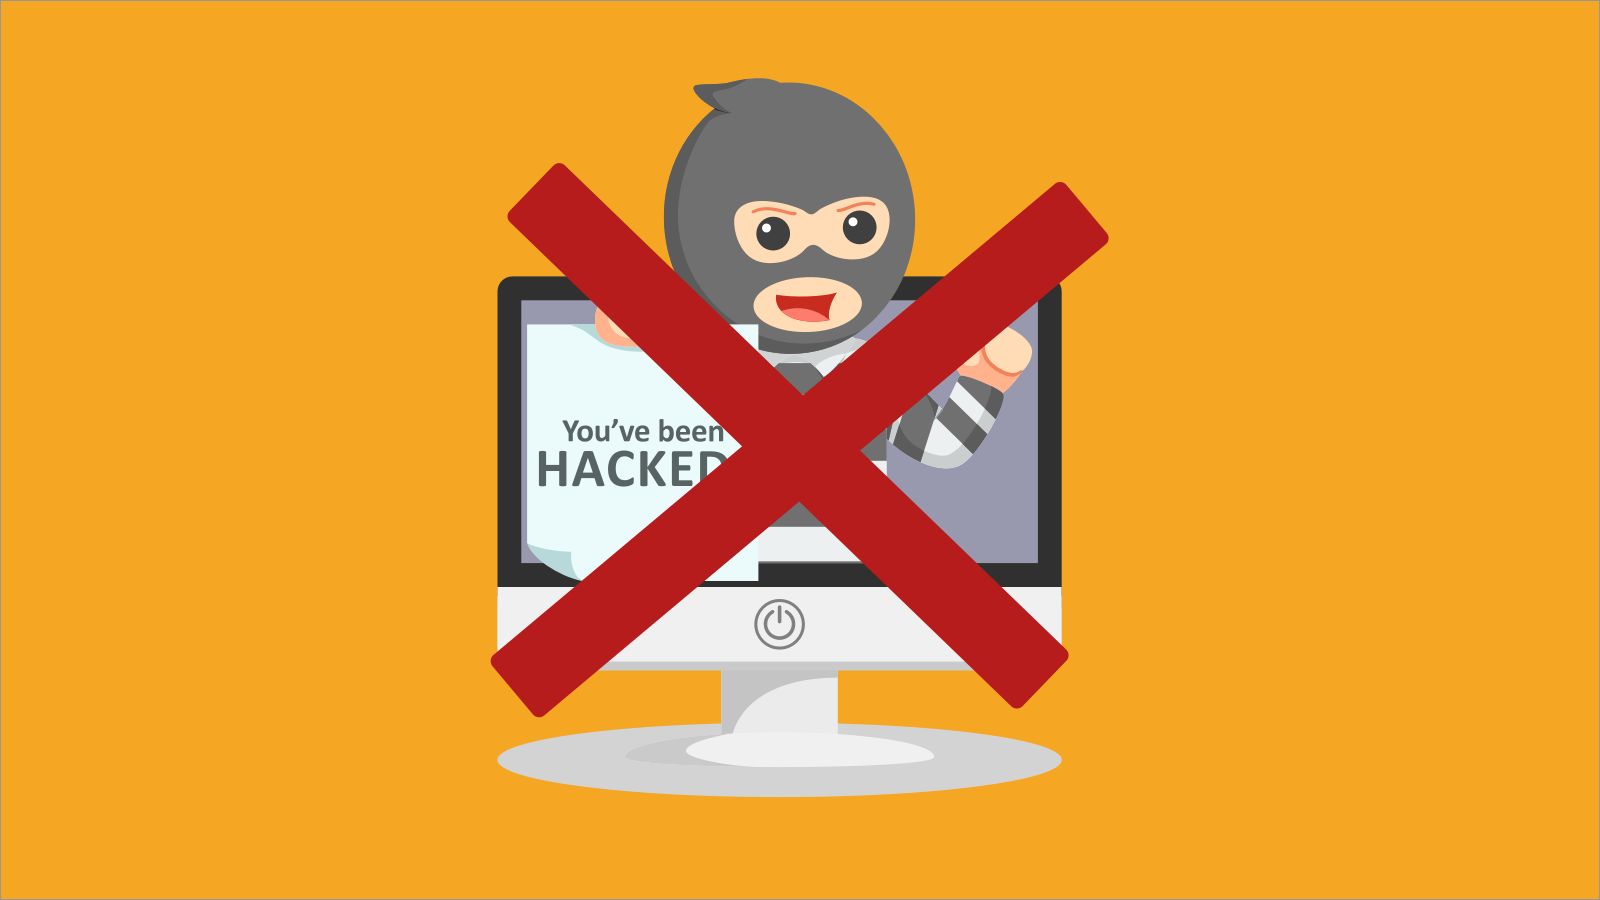 How google helps 600,000 webmasters re-secure their hacked sites every year